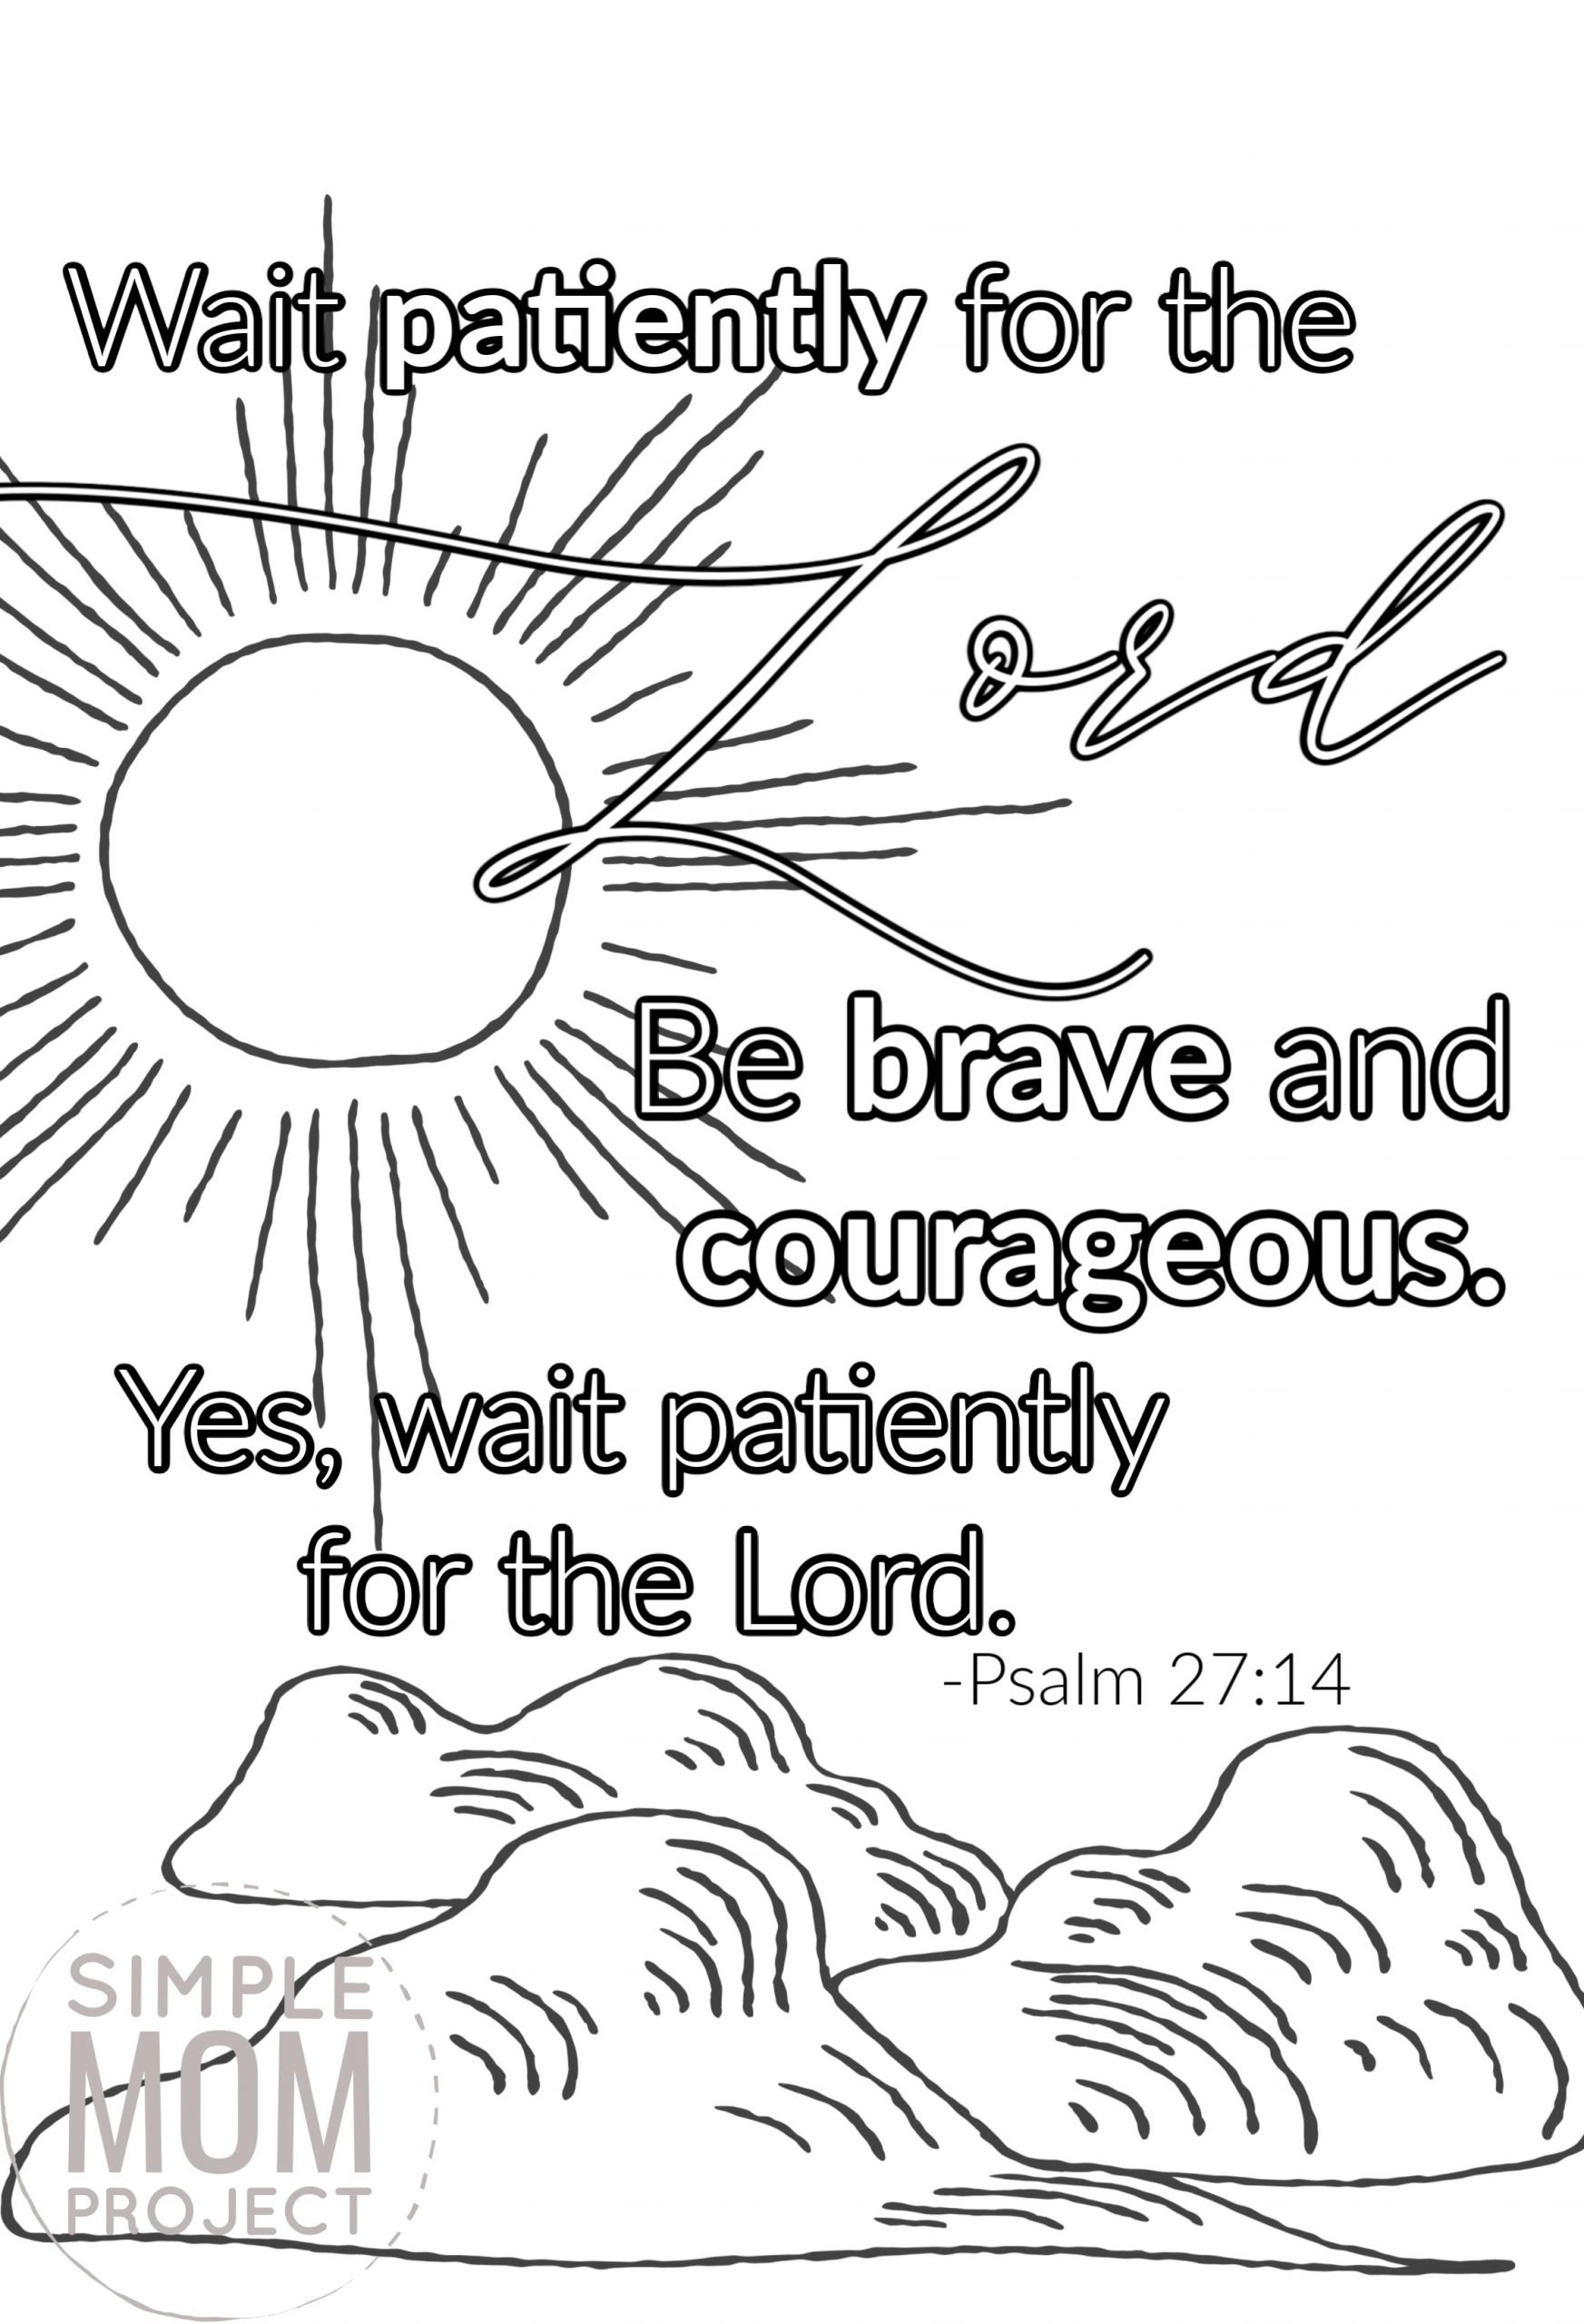 Free printable psalm bible verse coloring page â simple mom project